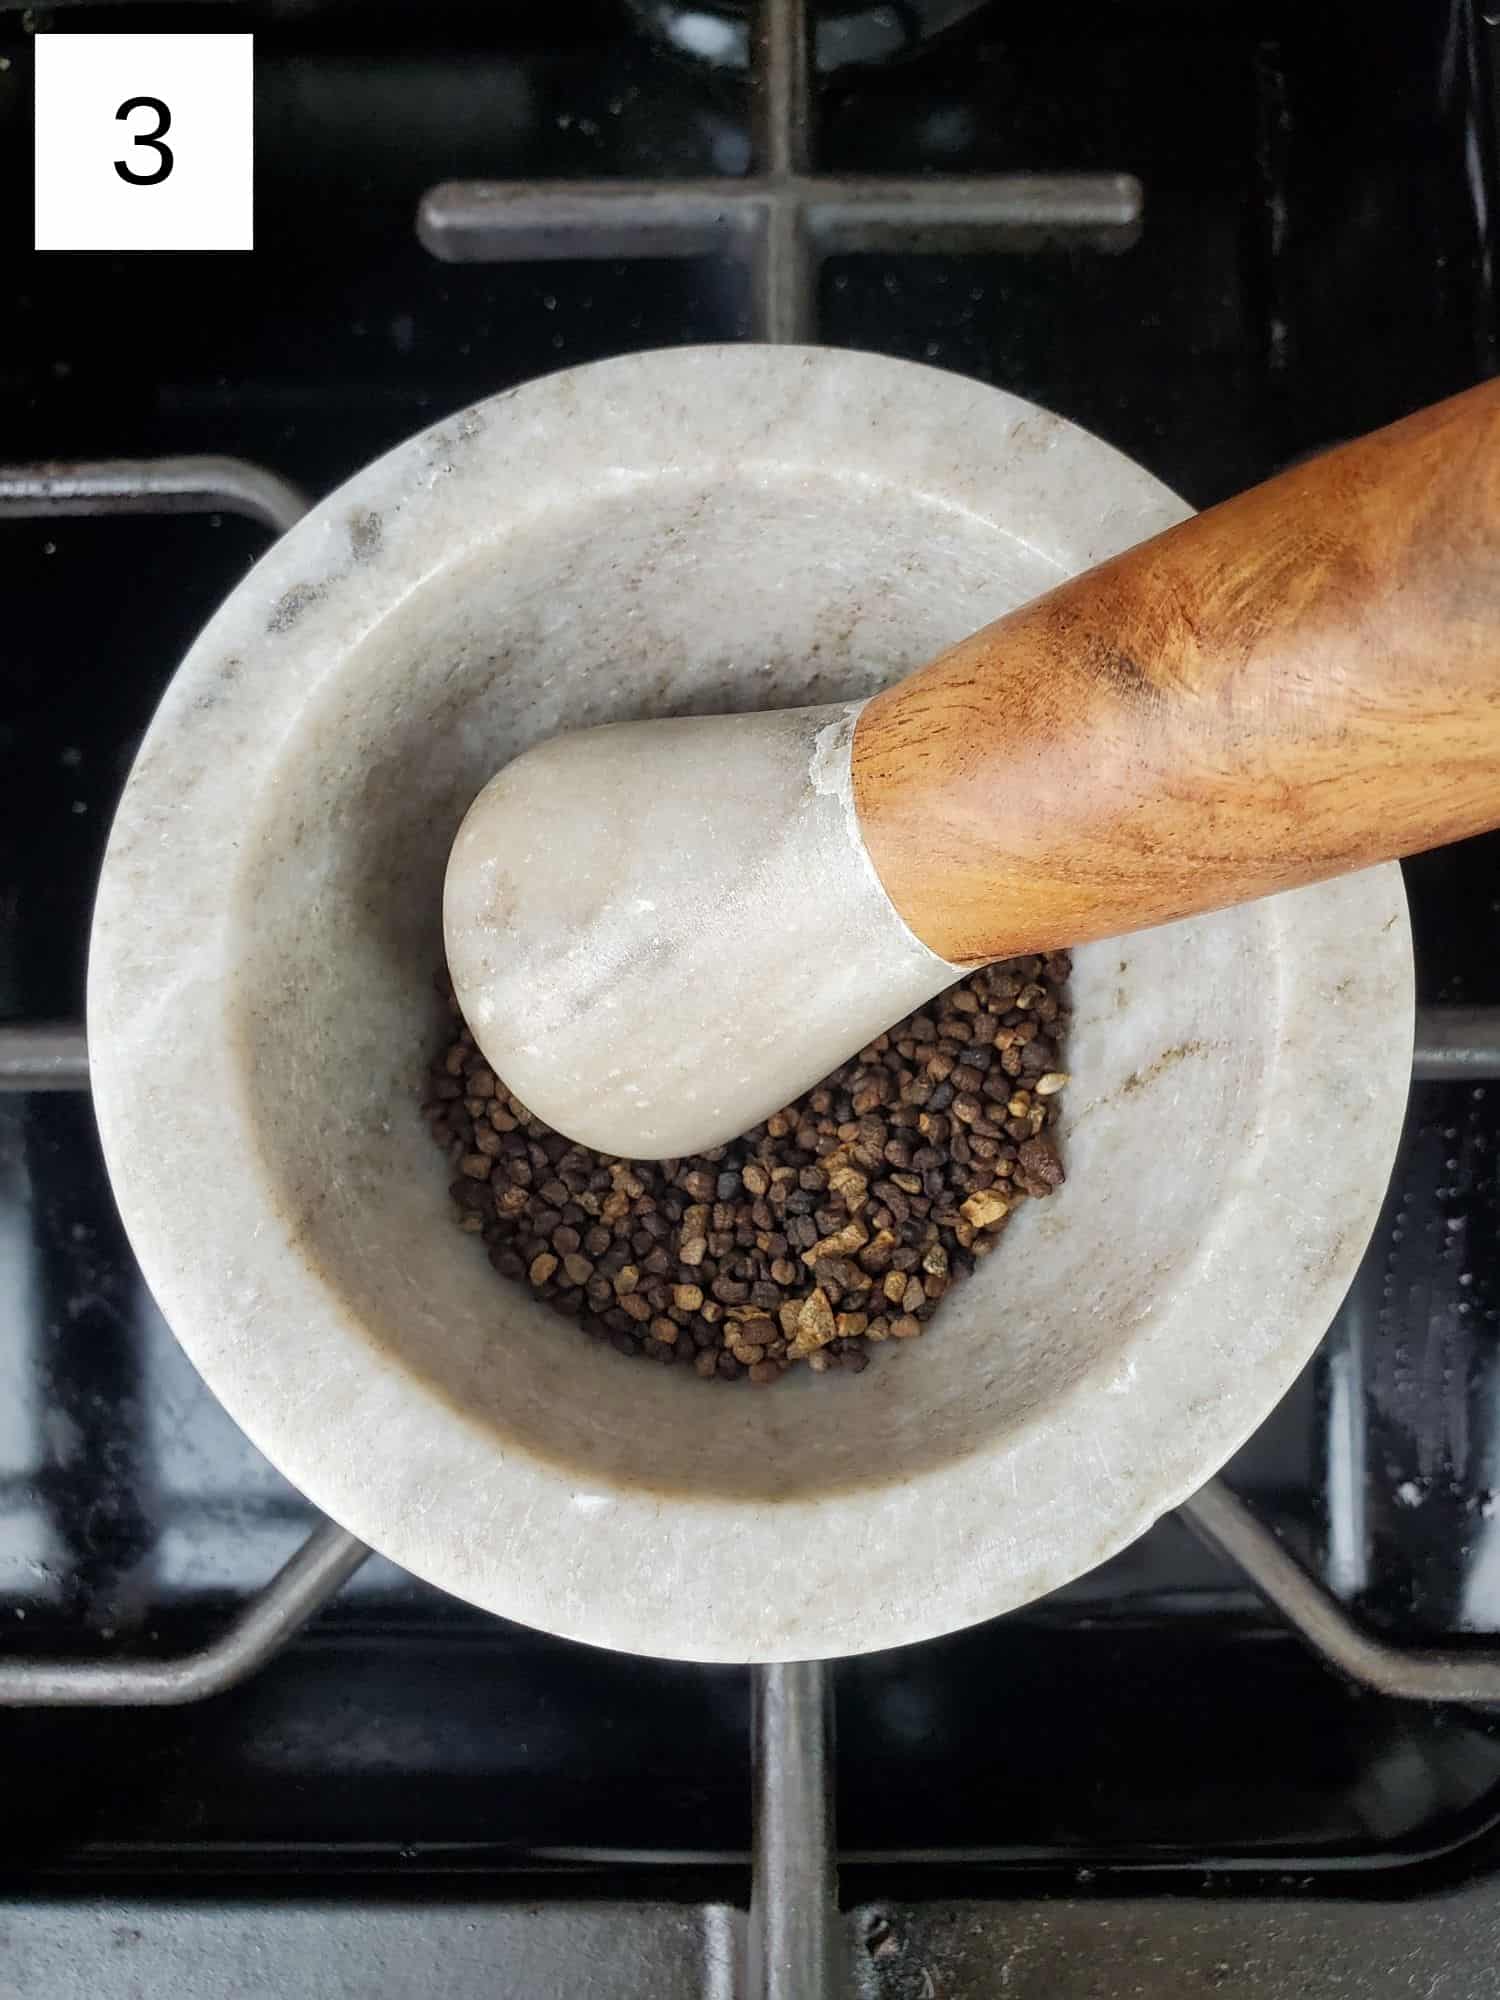 grinding the toasted cardamom seeds using a mortar and pestle.